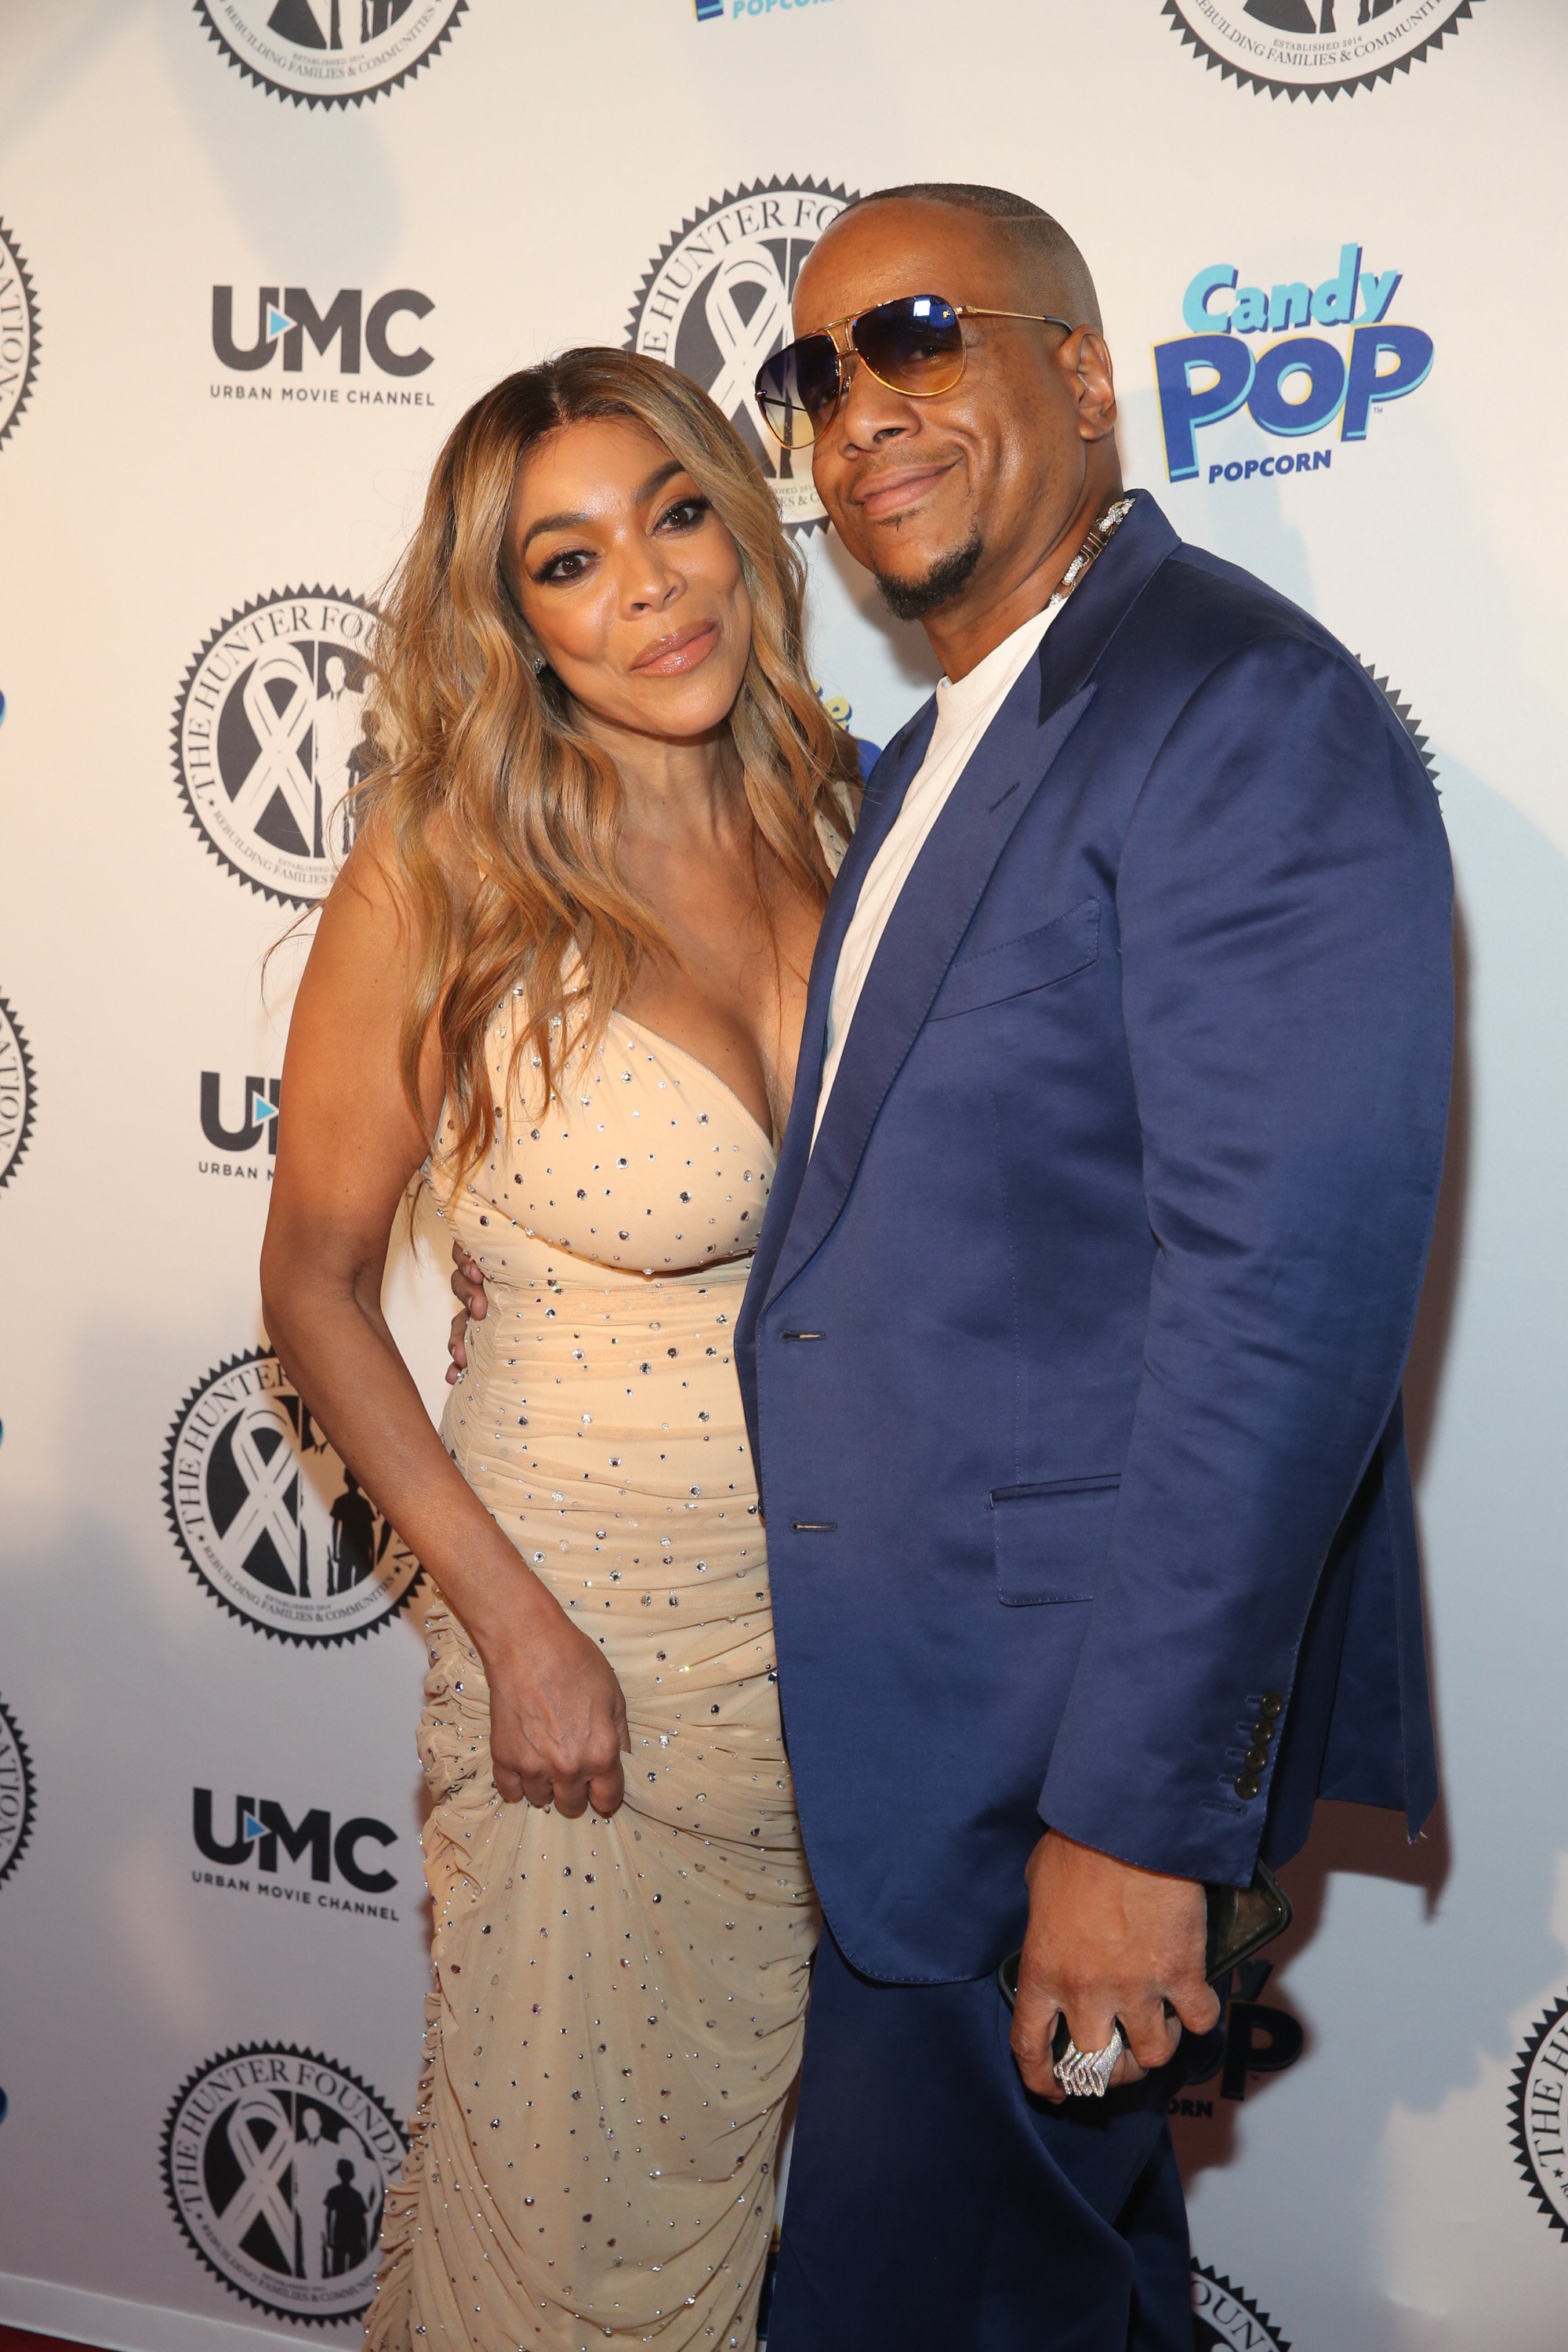 Wendy Williams & Kevin Hunter attend ‘Wendy Williams and The Hunter Foundation’ gala in New York. | Photo: Getty Images